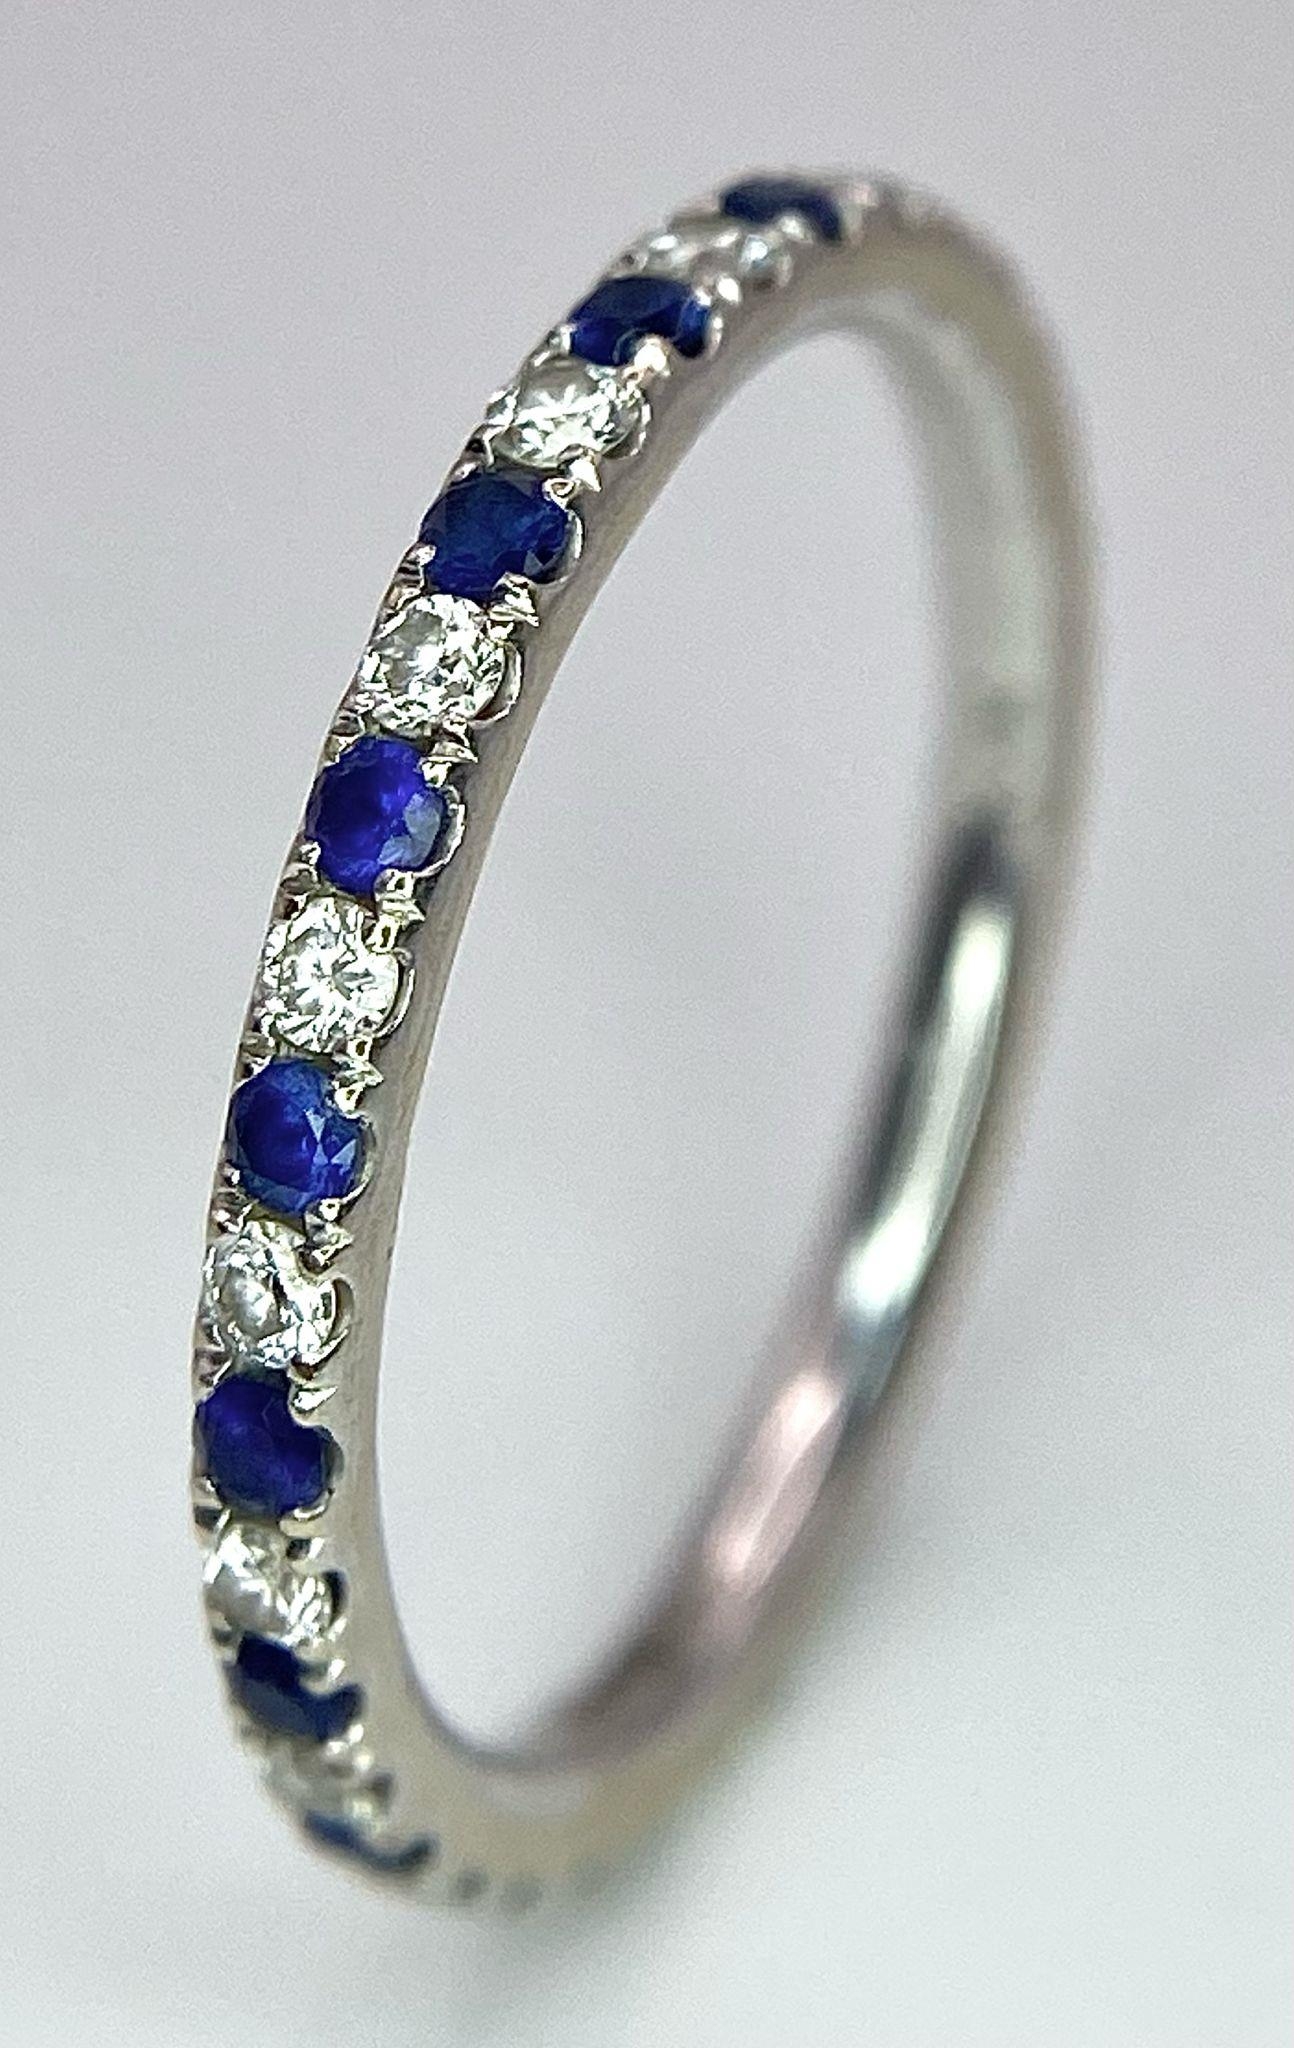 A 14ct white gold diamond and sapphire full eternity ring set with 18 diamonds and 18 sapphires, 1.